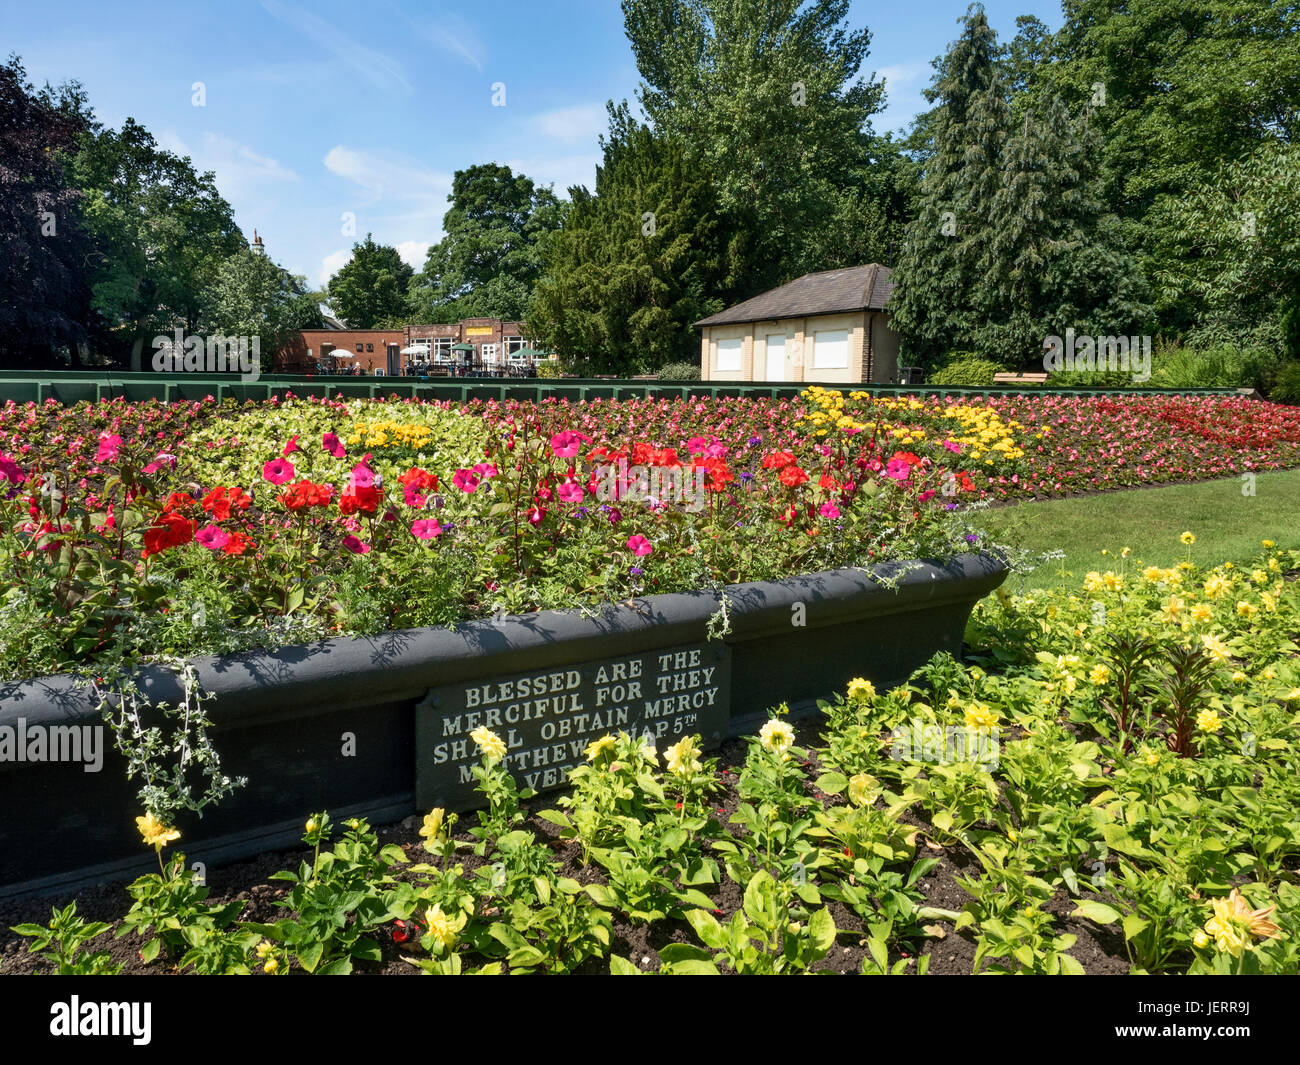 Summer Flowers and Planter with Biblical Quotation in Spa Gardens at Ripon North Yorkshire England Stock Photo